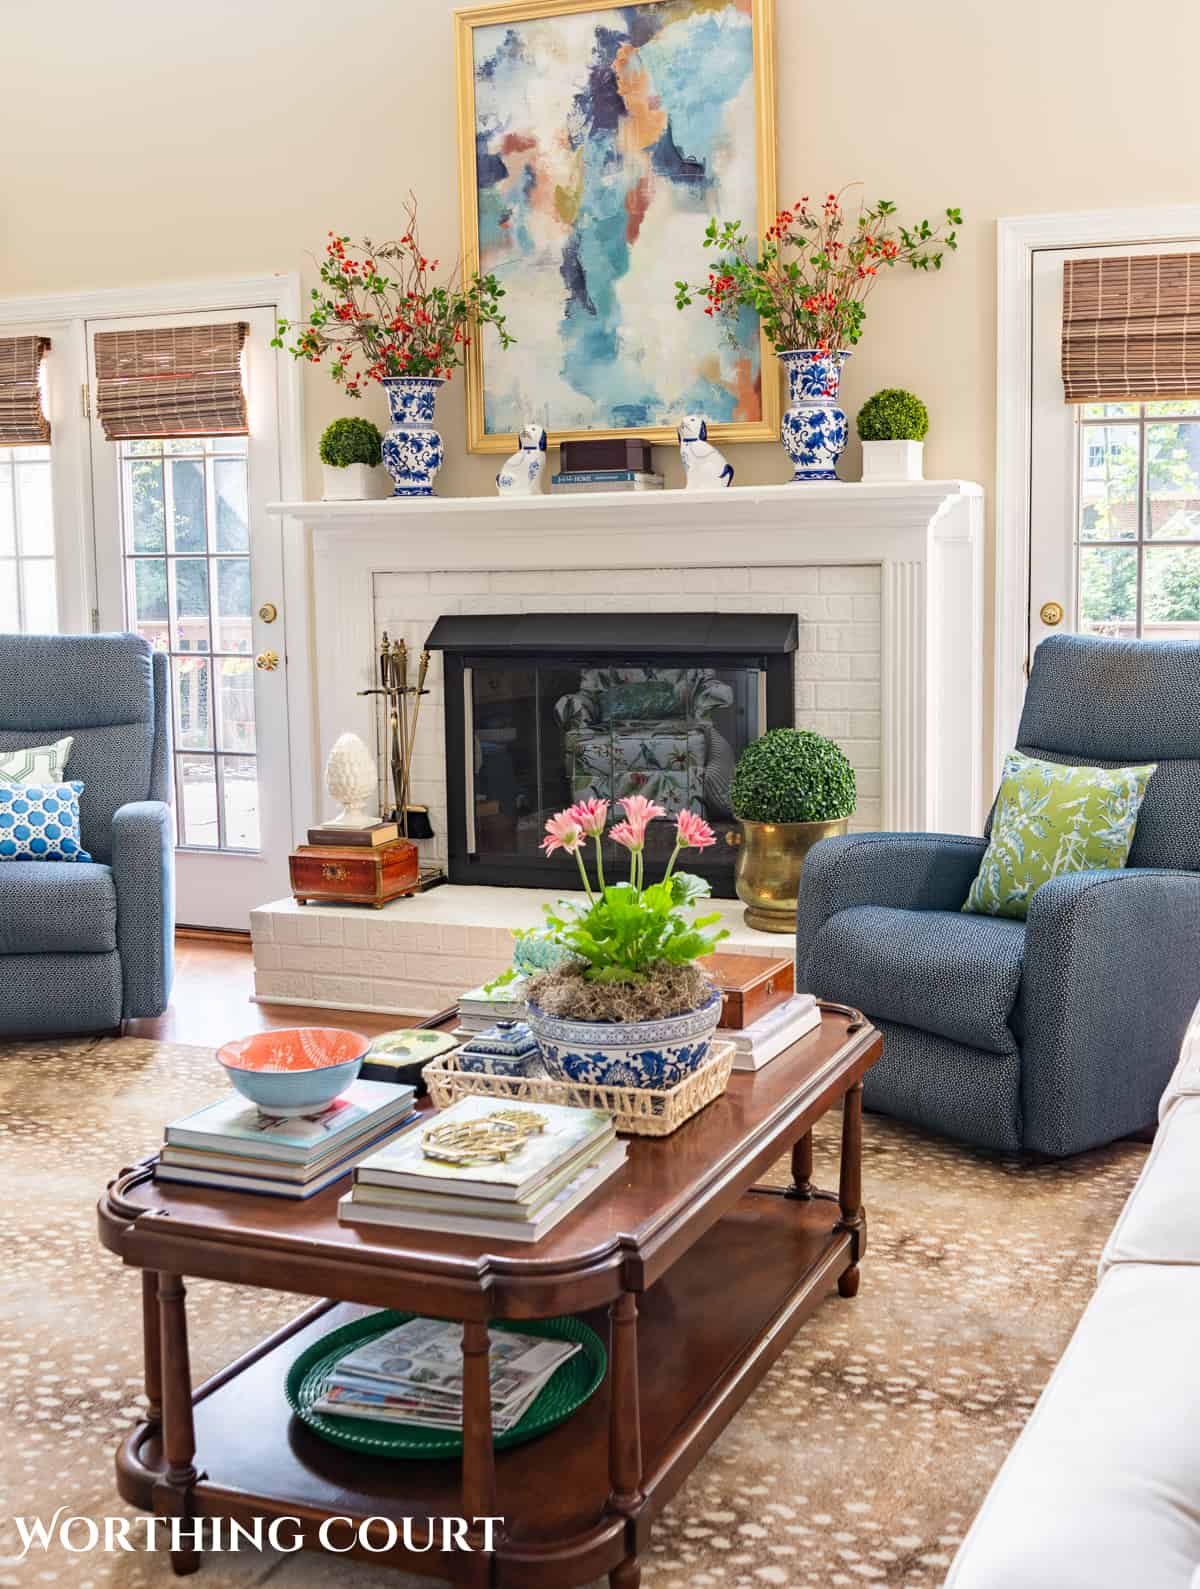 blue recliners flanking a white brick fireplace with late summer decorations and beige wall color